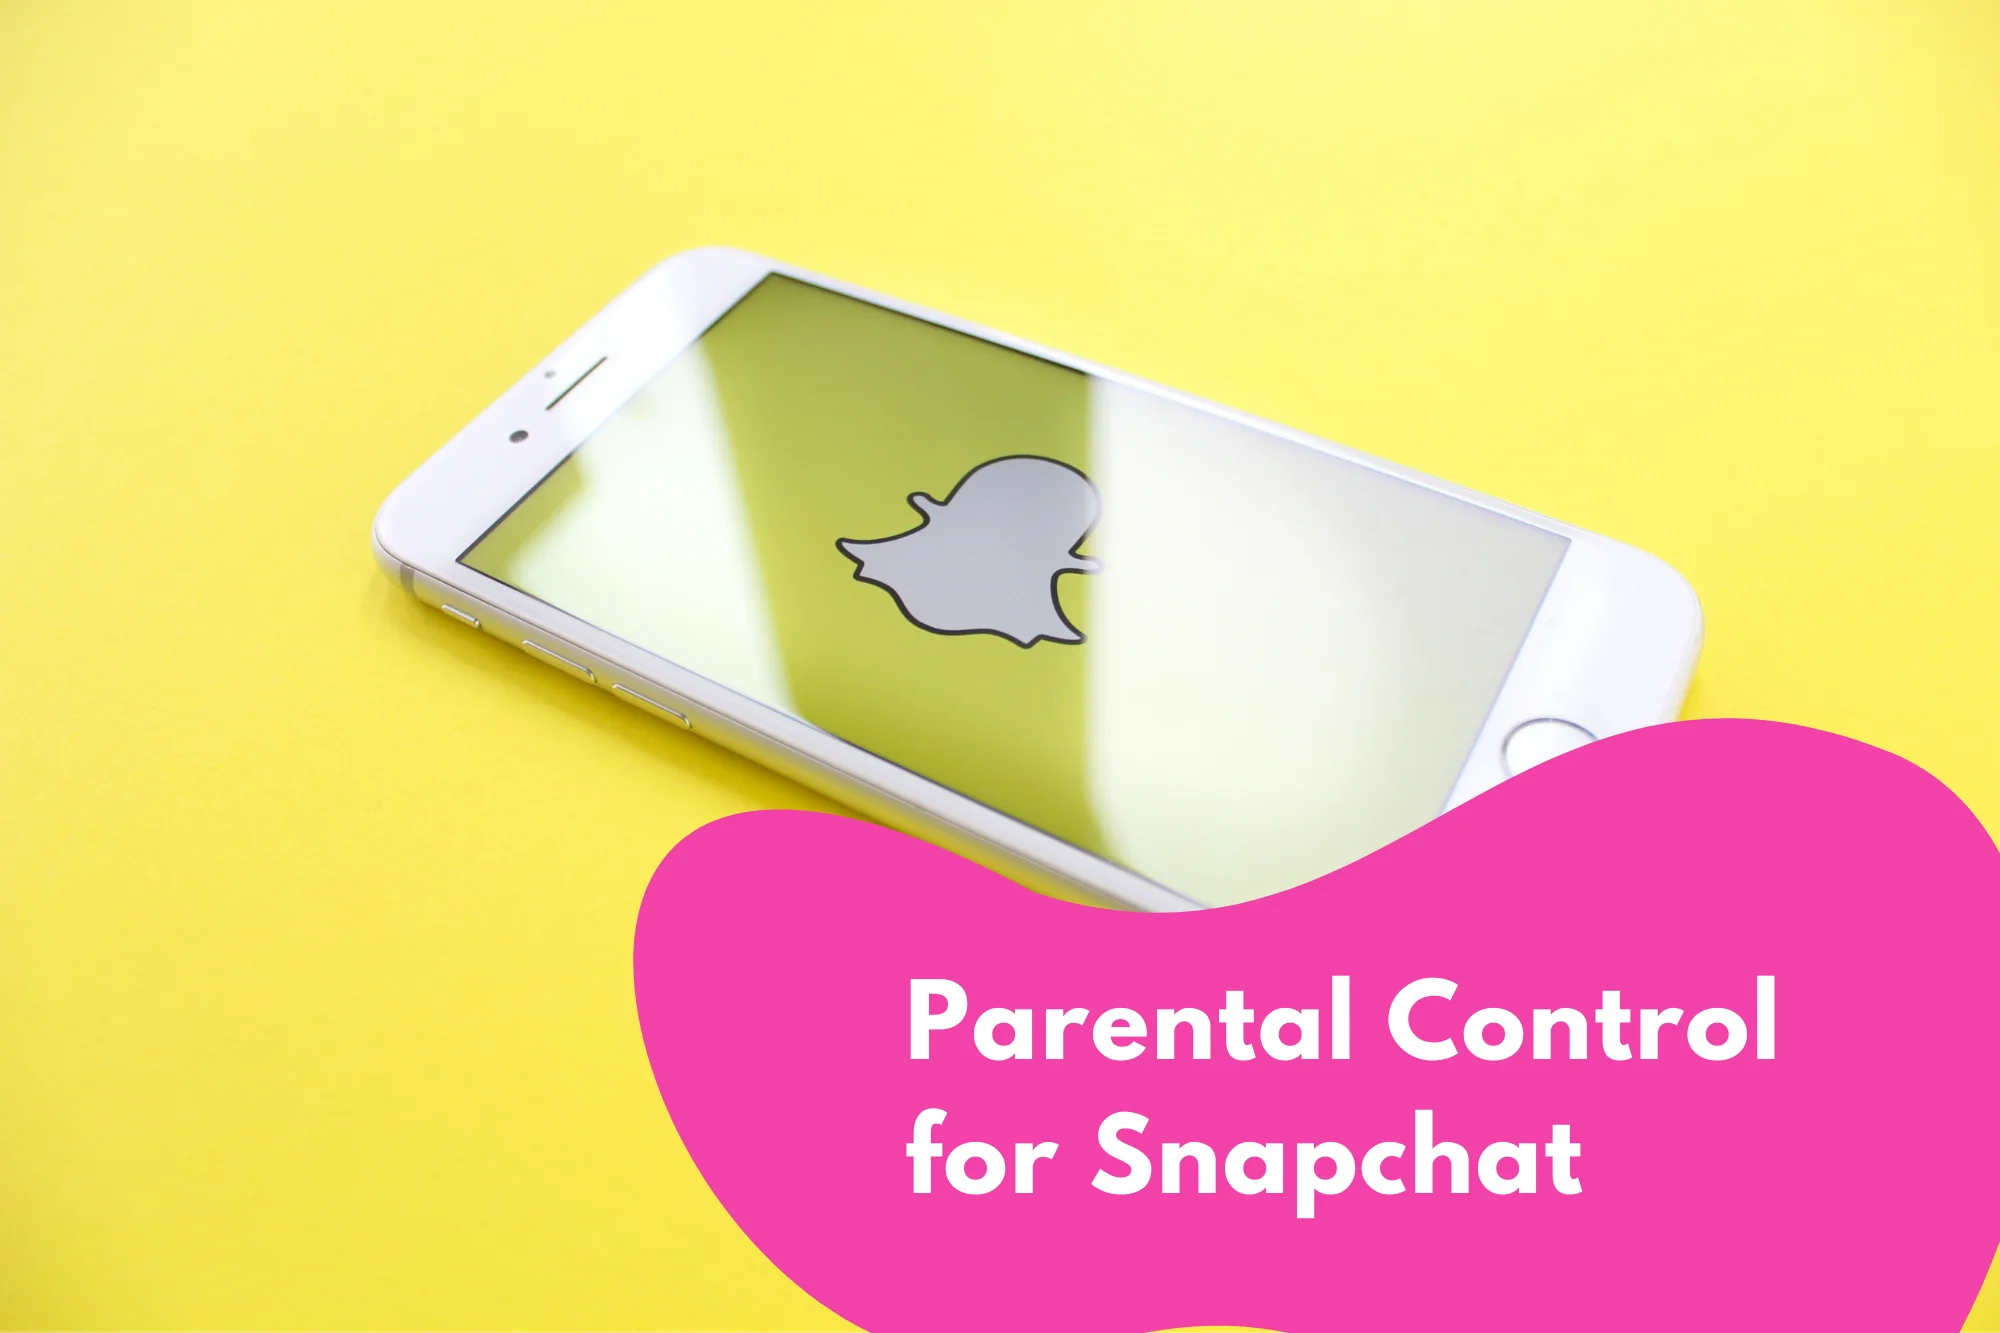 Parental Control for Snapchat